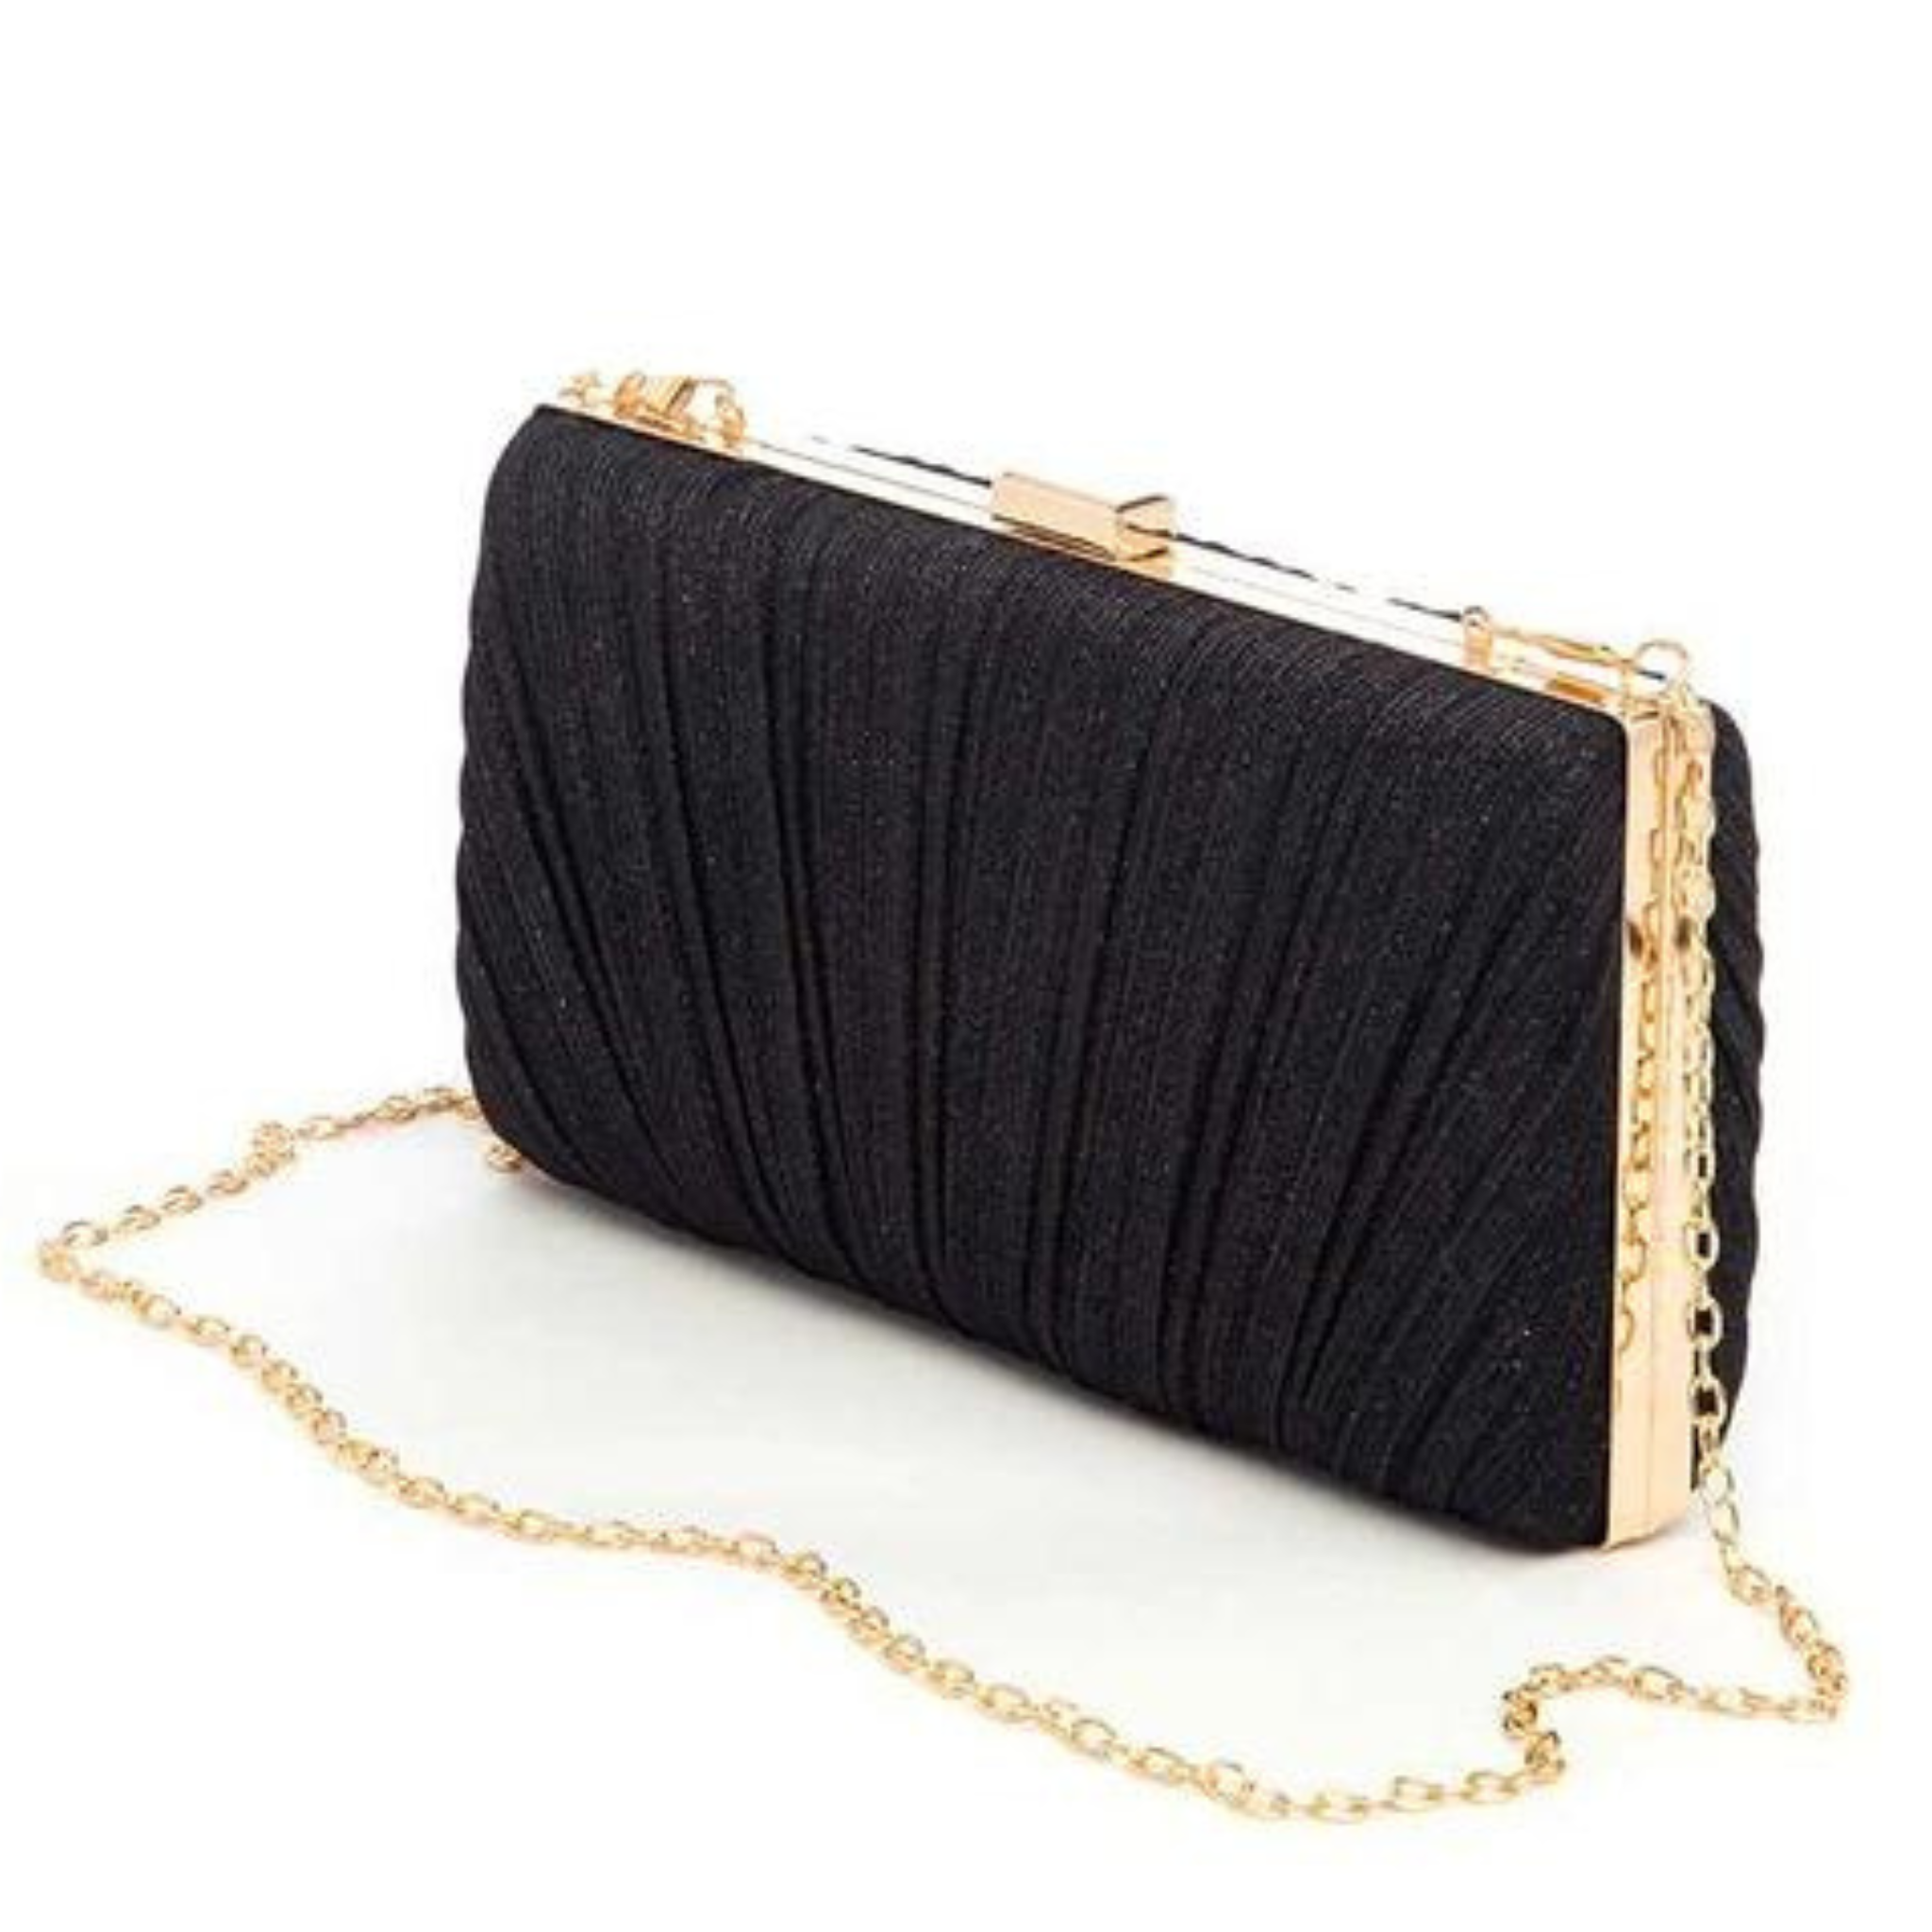 Metallic Pleated Party Box Clutch